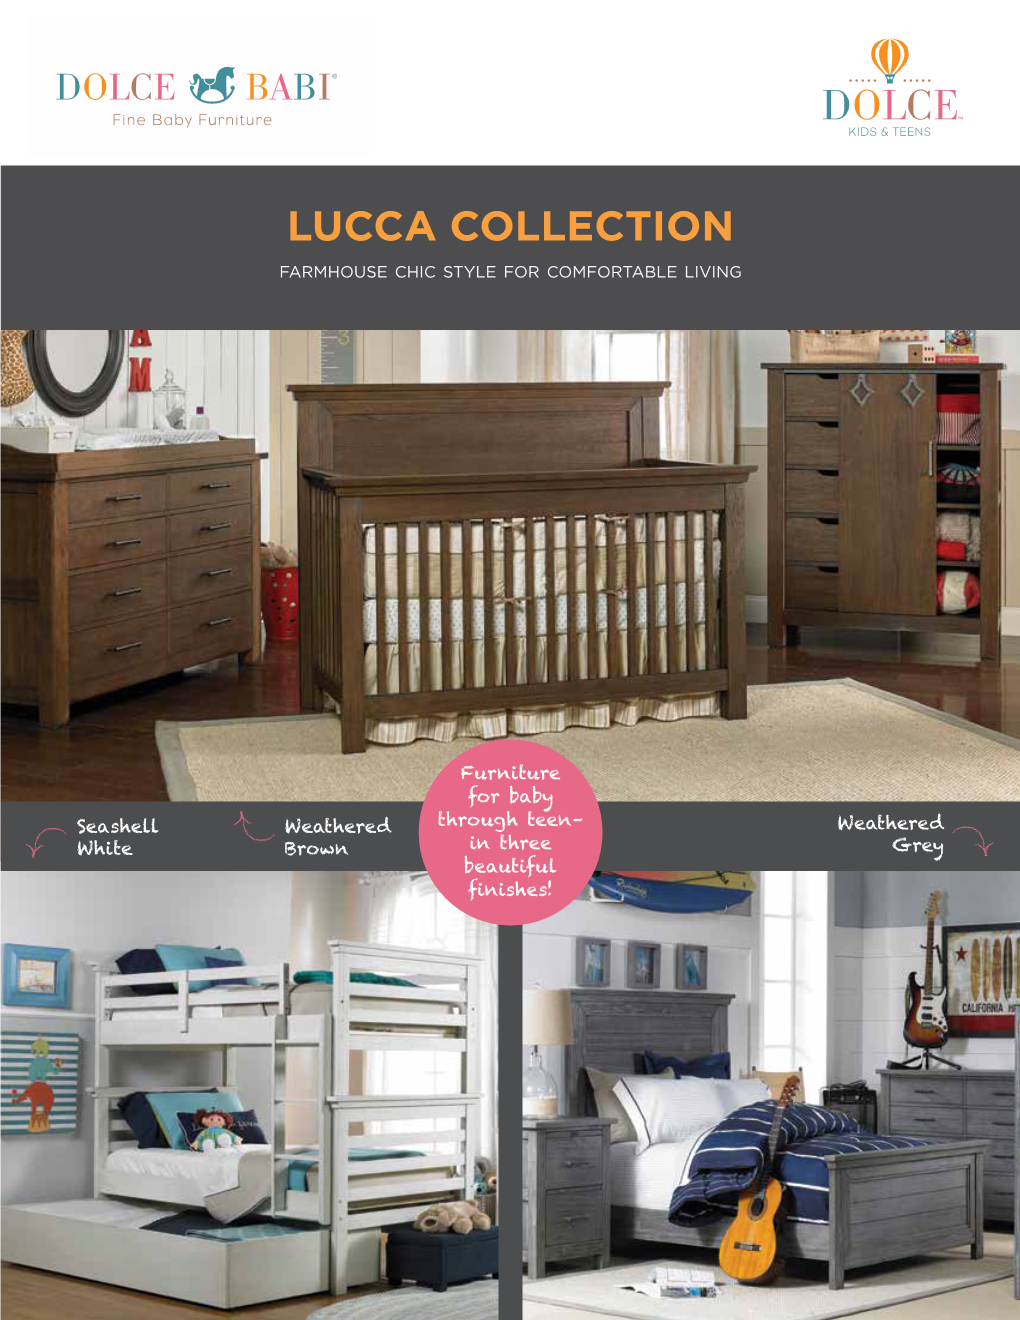 LUCCA COLLECTION Farmhouse Chic Style for Comfortable Living